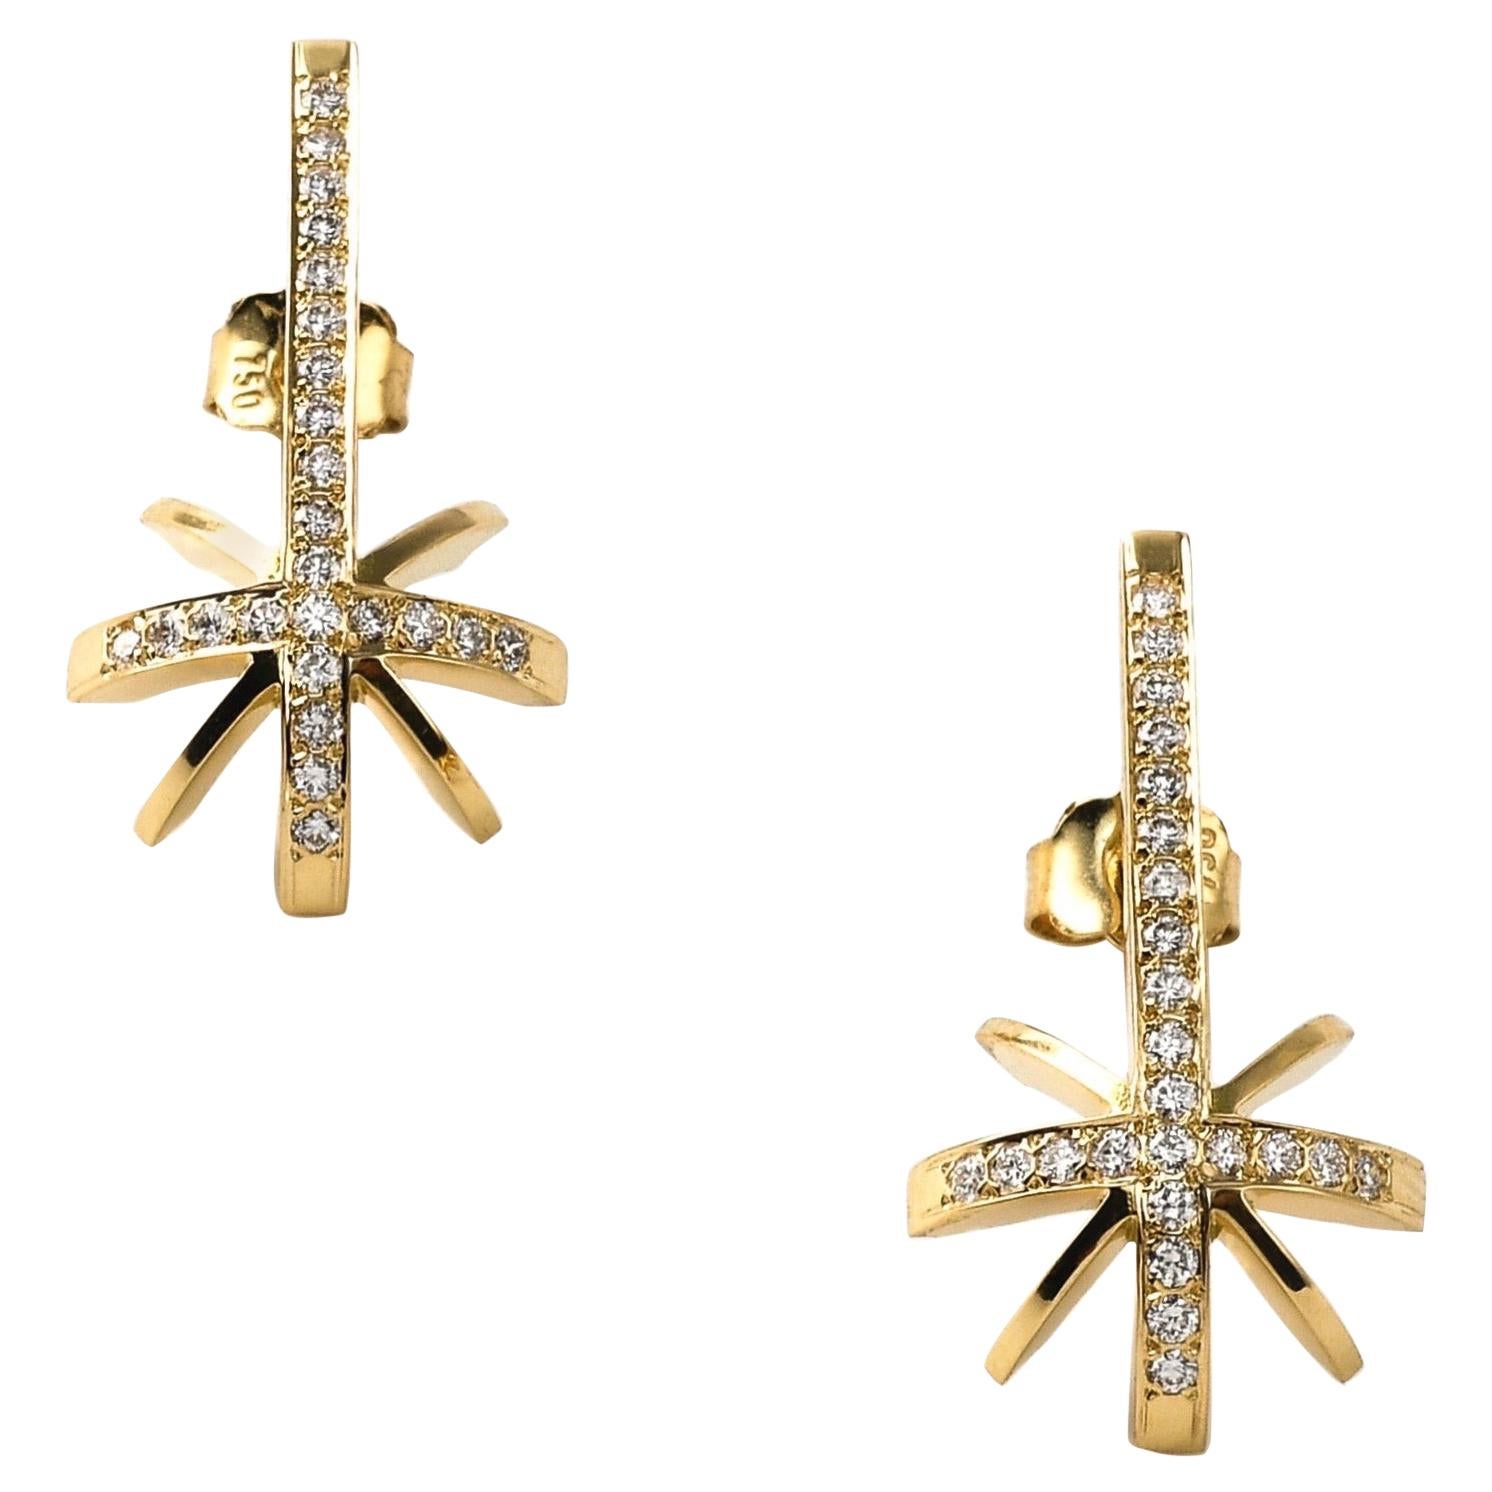 Contemporary Sculptural 18K Yellow Gold & White Diamond Shooting Star Earrings